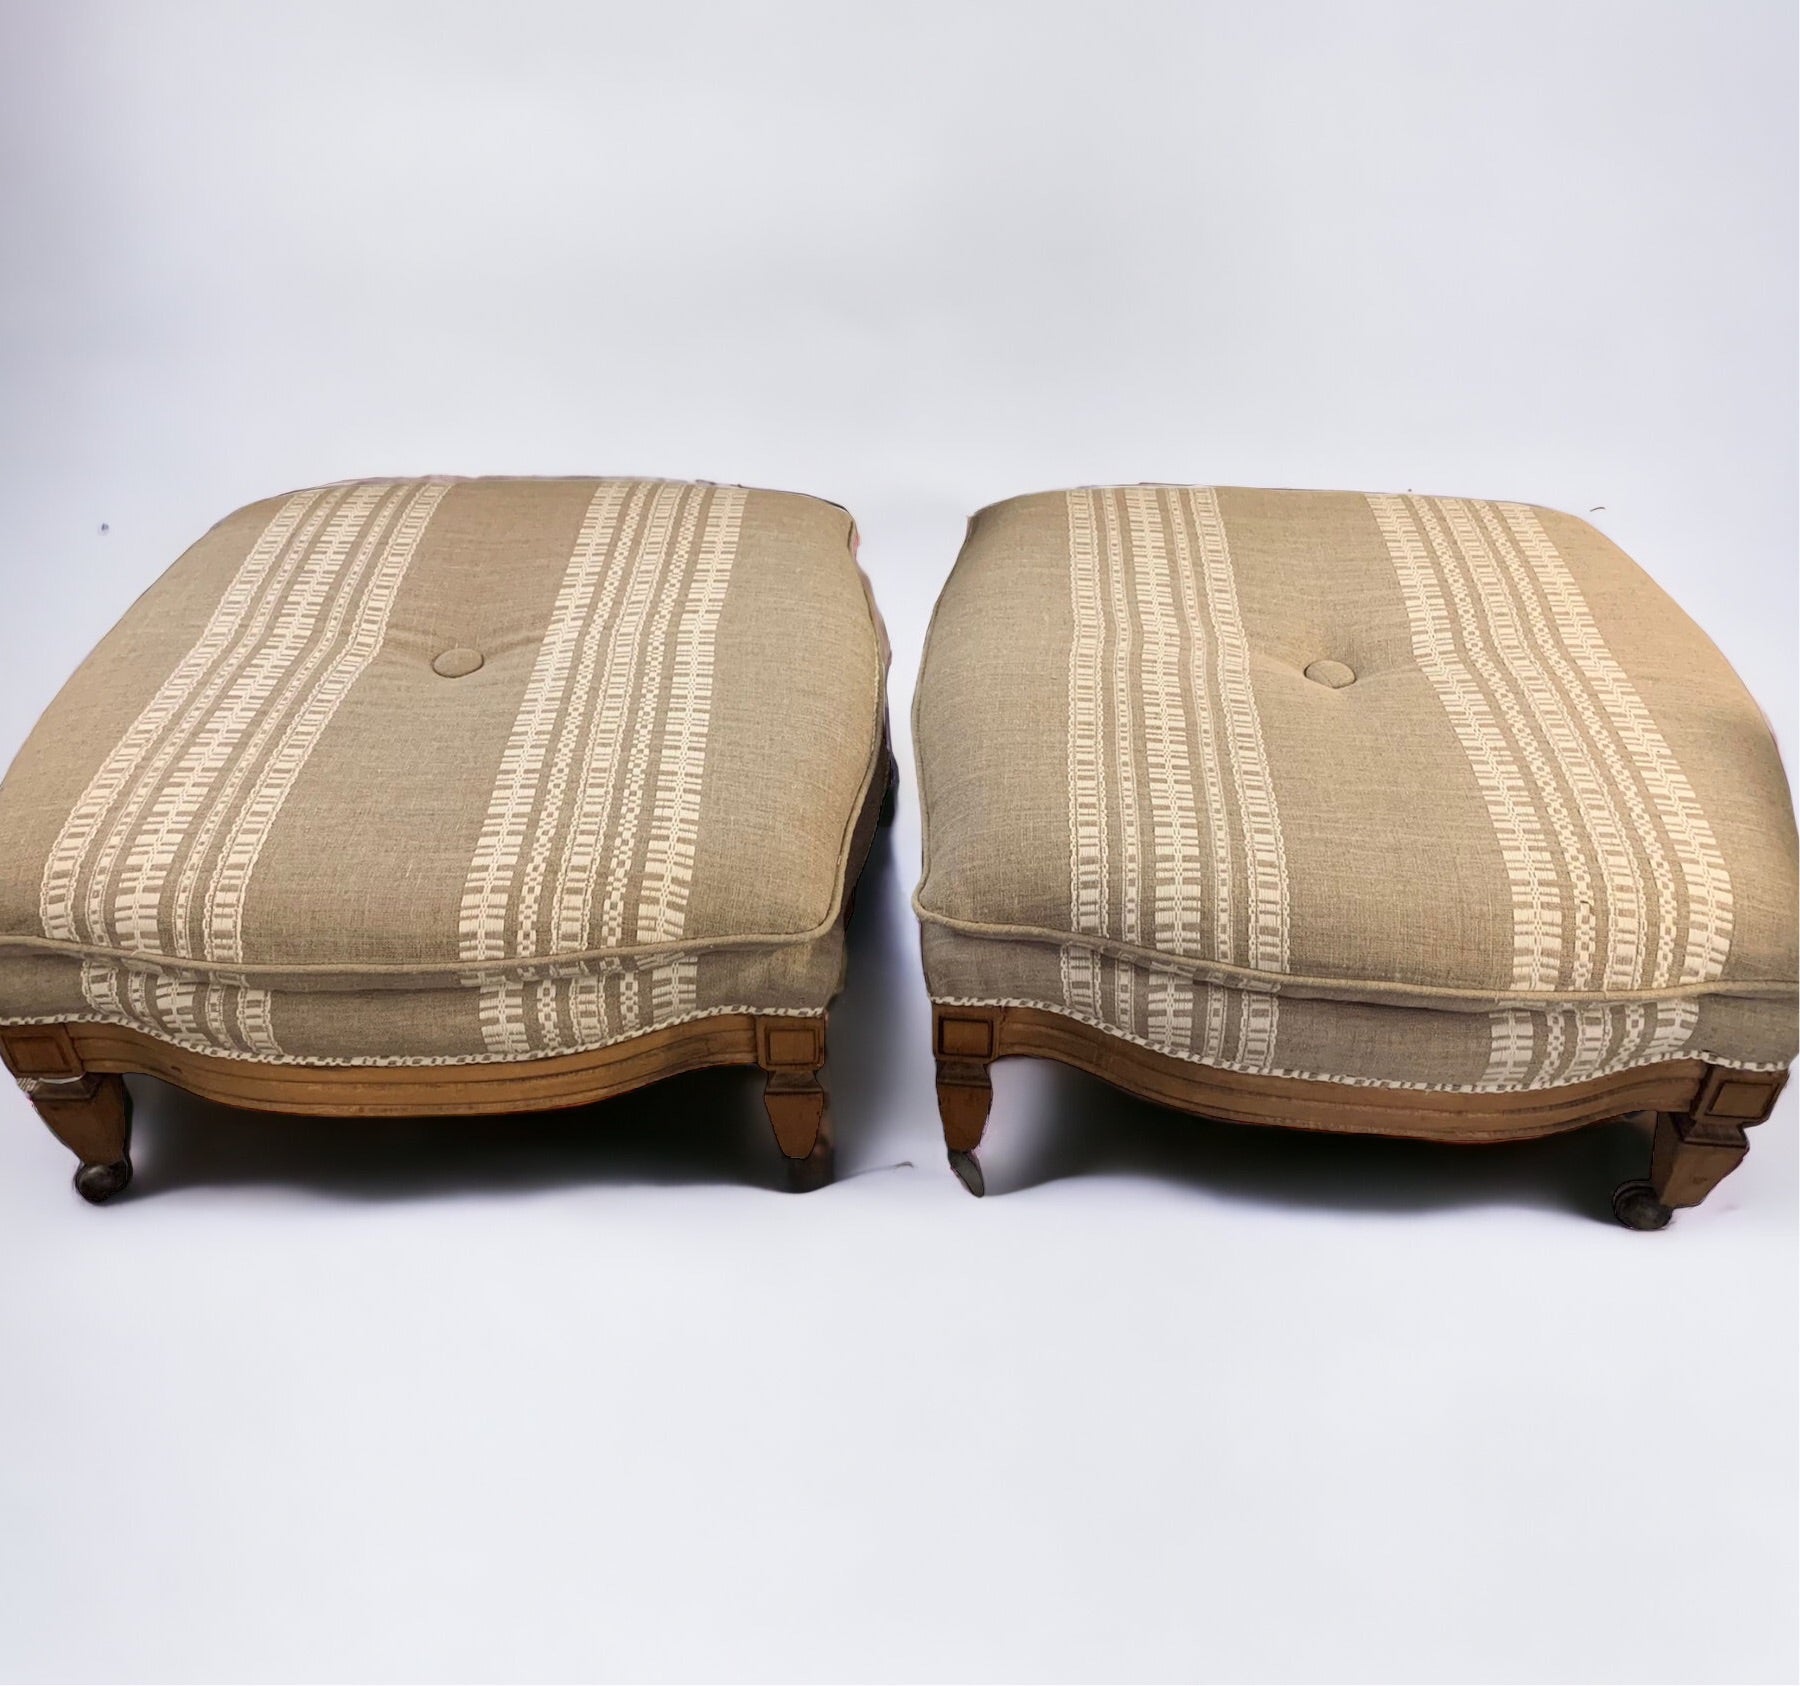 Embroidered Ottomans (Pair)